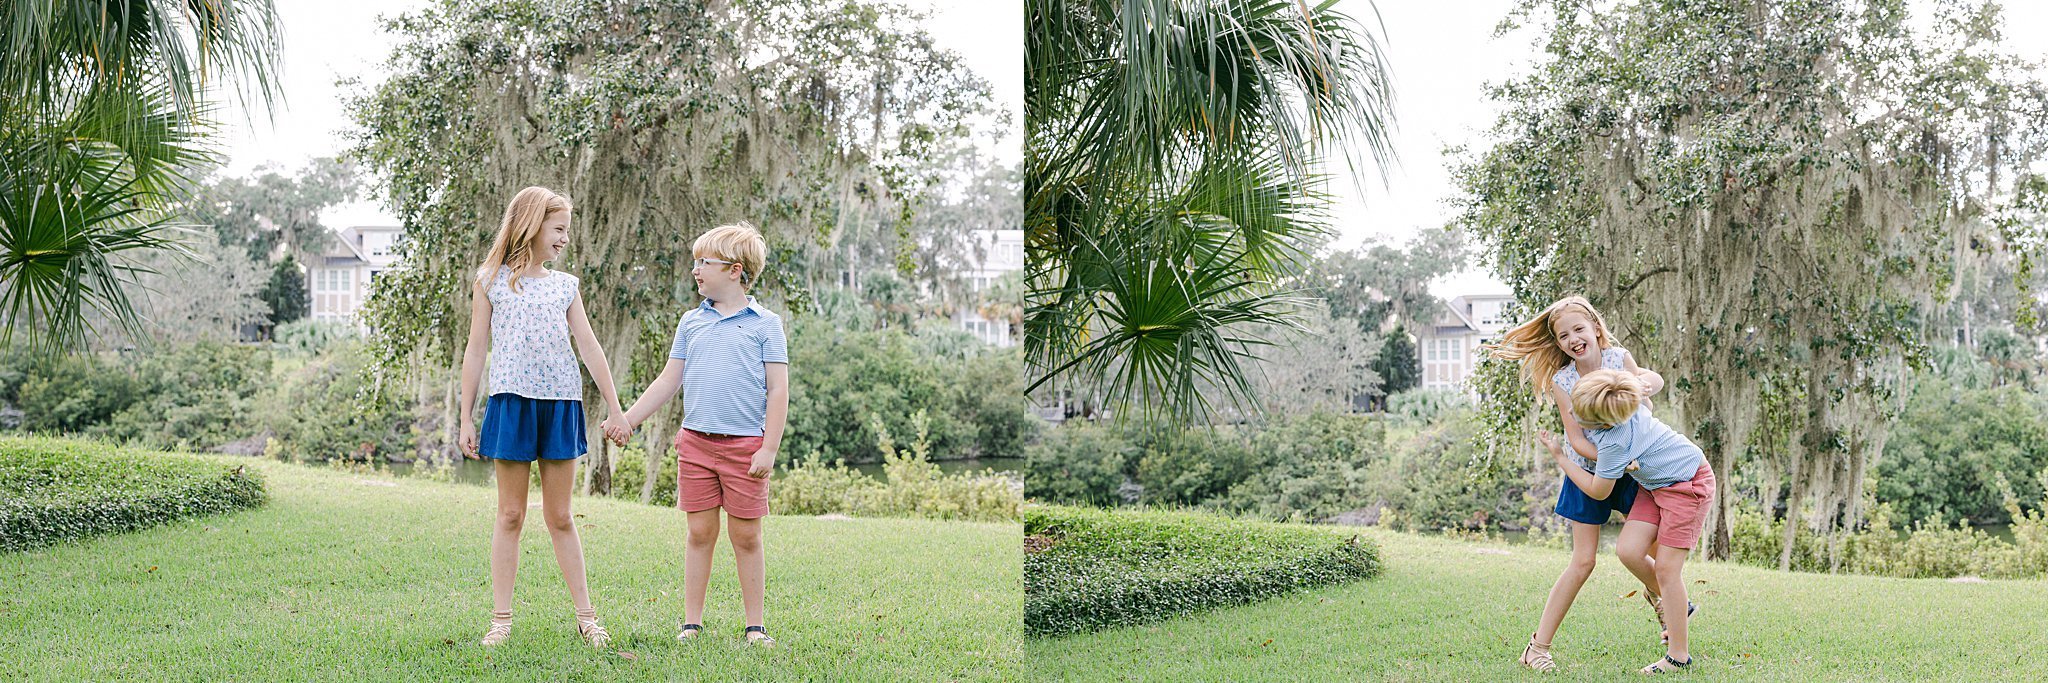 Katherine_Ives_Photography_Patton_Family_Montage_Palmetto_Bluff_10243.JPG